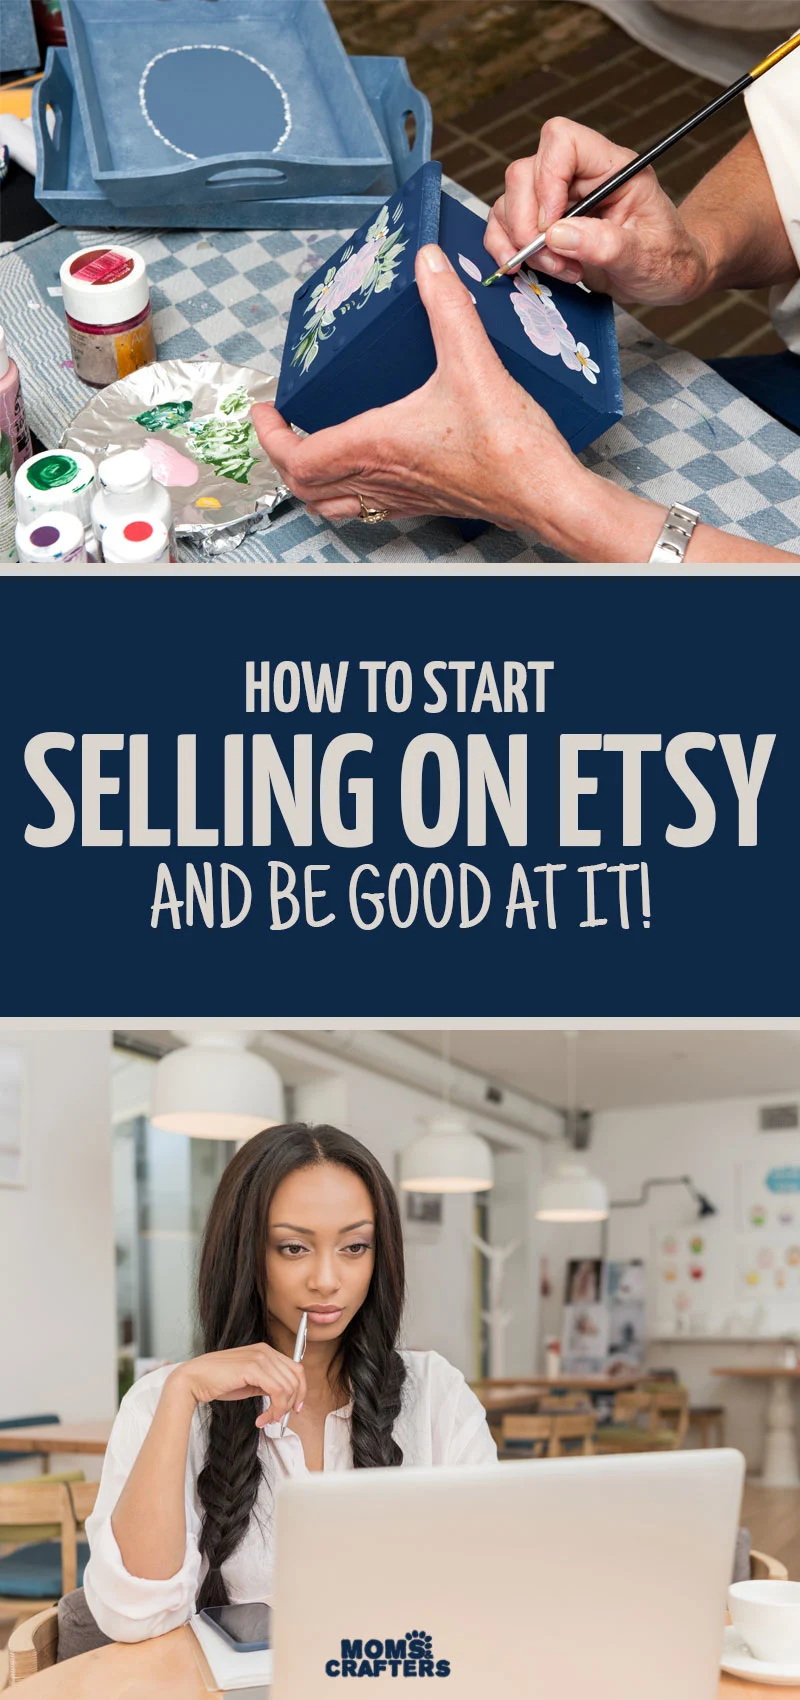 How to start selling online and be good at it! These Selling on Etsy tips and products ideas will help you earn some extra cash and set up small businesses. I hope these posts and articles help you out!